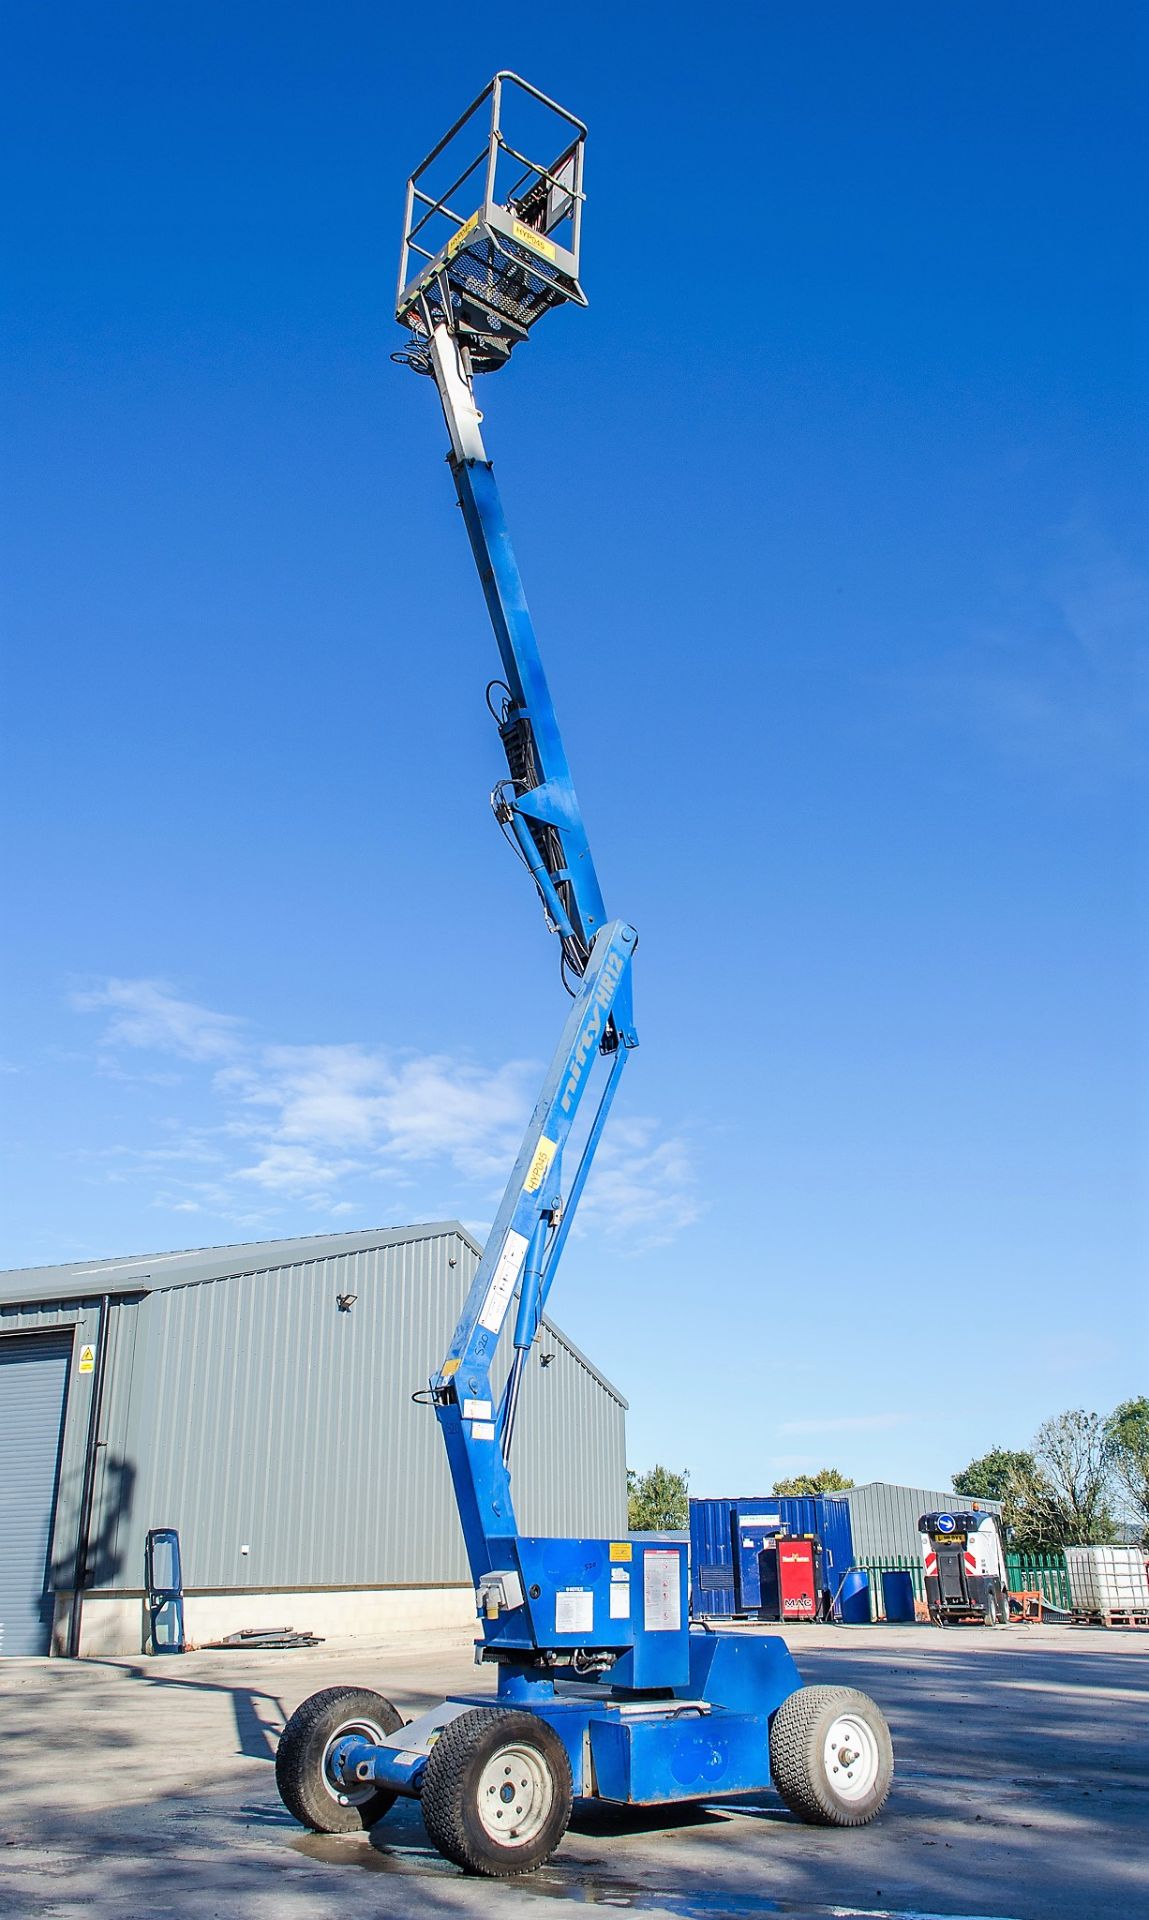 Nifty HR12 NDE diesel driven/battery electric articulated boom lift  Year: 2006  S/N: 12-13635 - Image 7 of 17